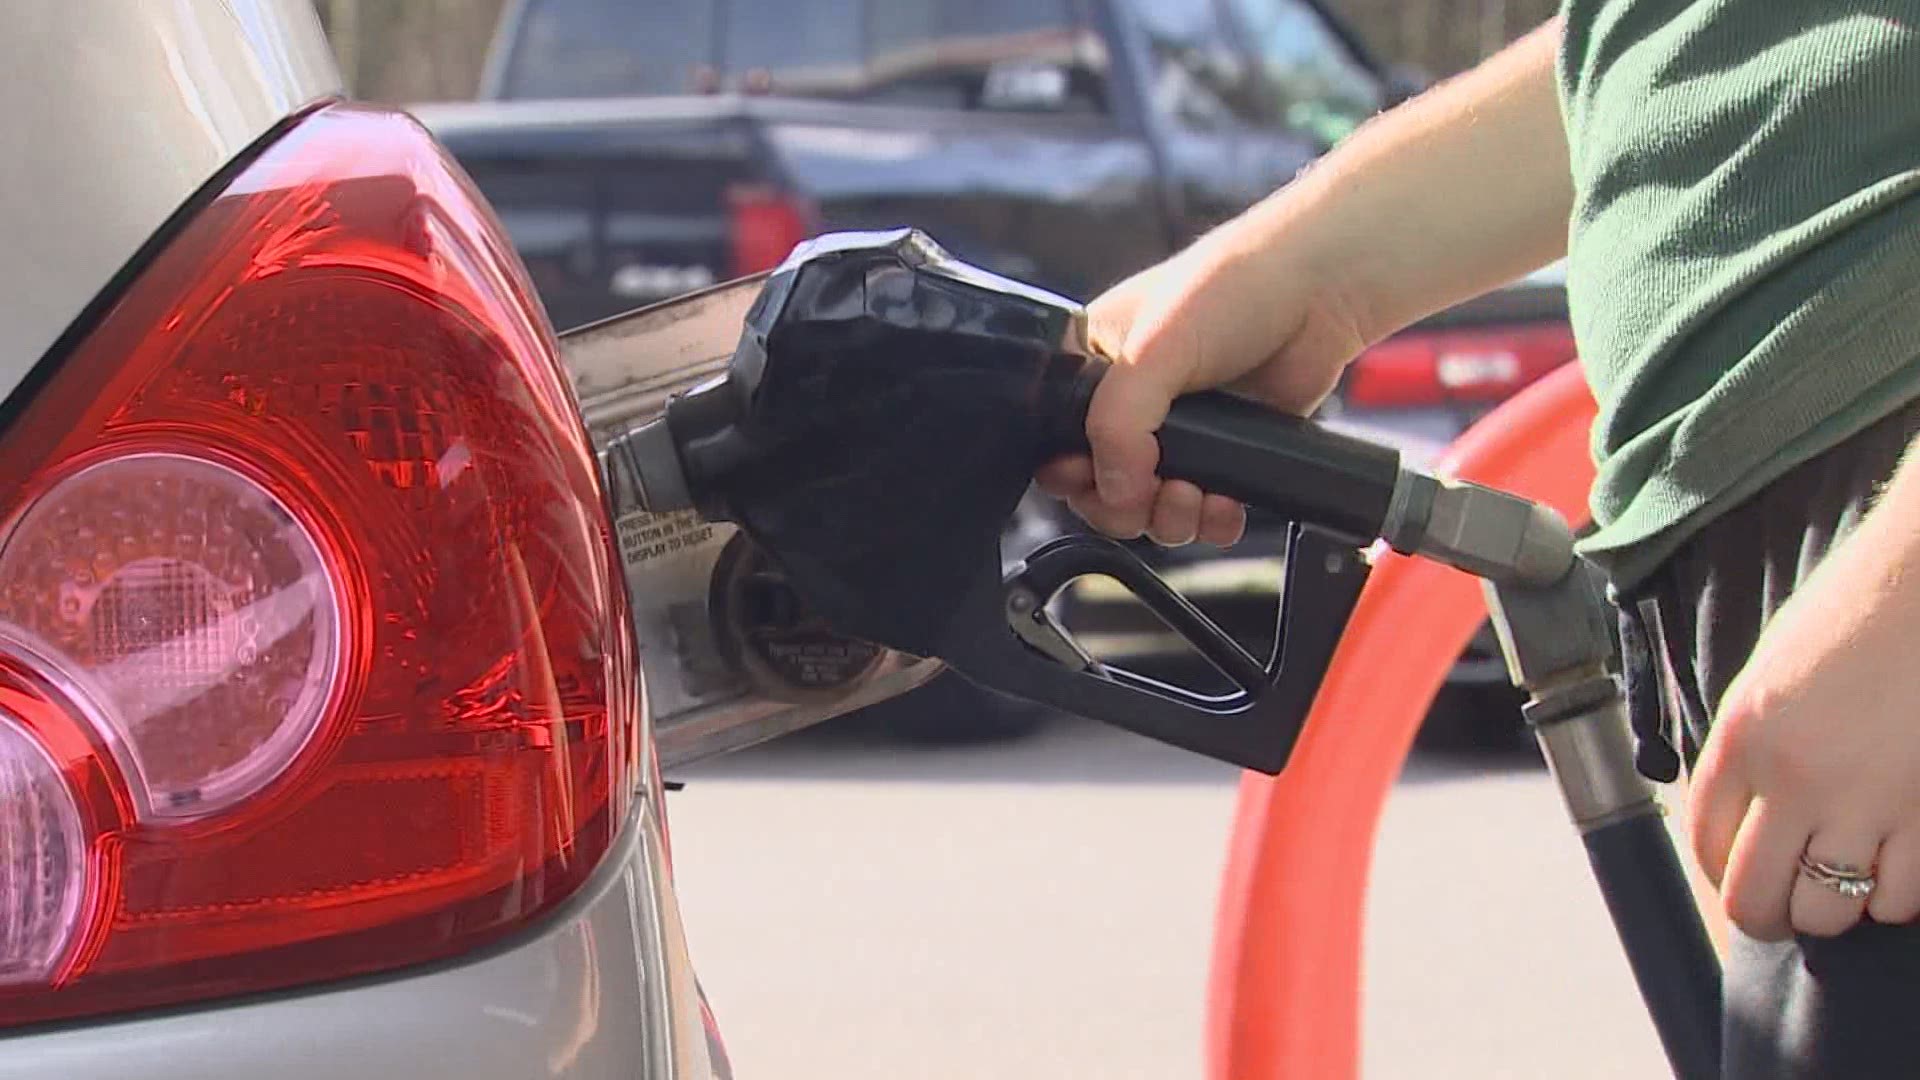 #HTownRush has a look at the multiple reasons why gas prices are on the rise